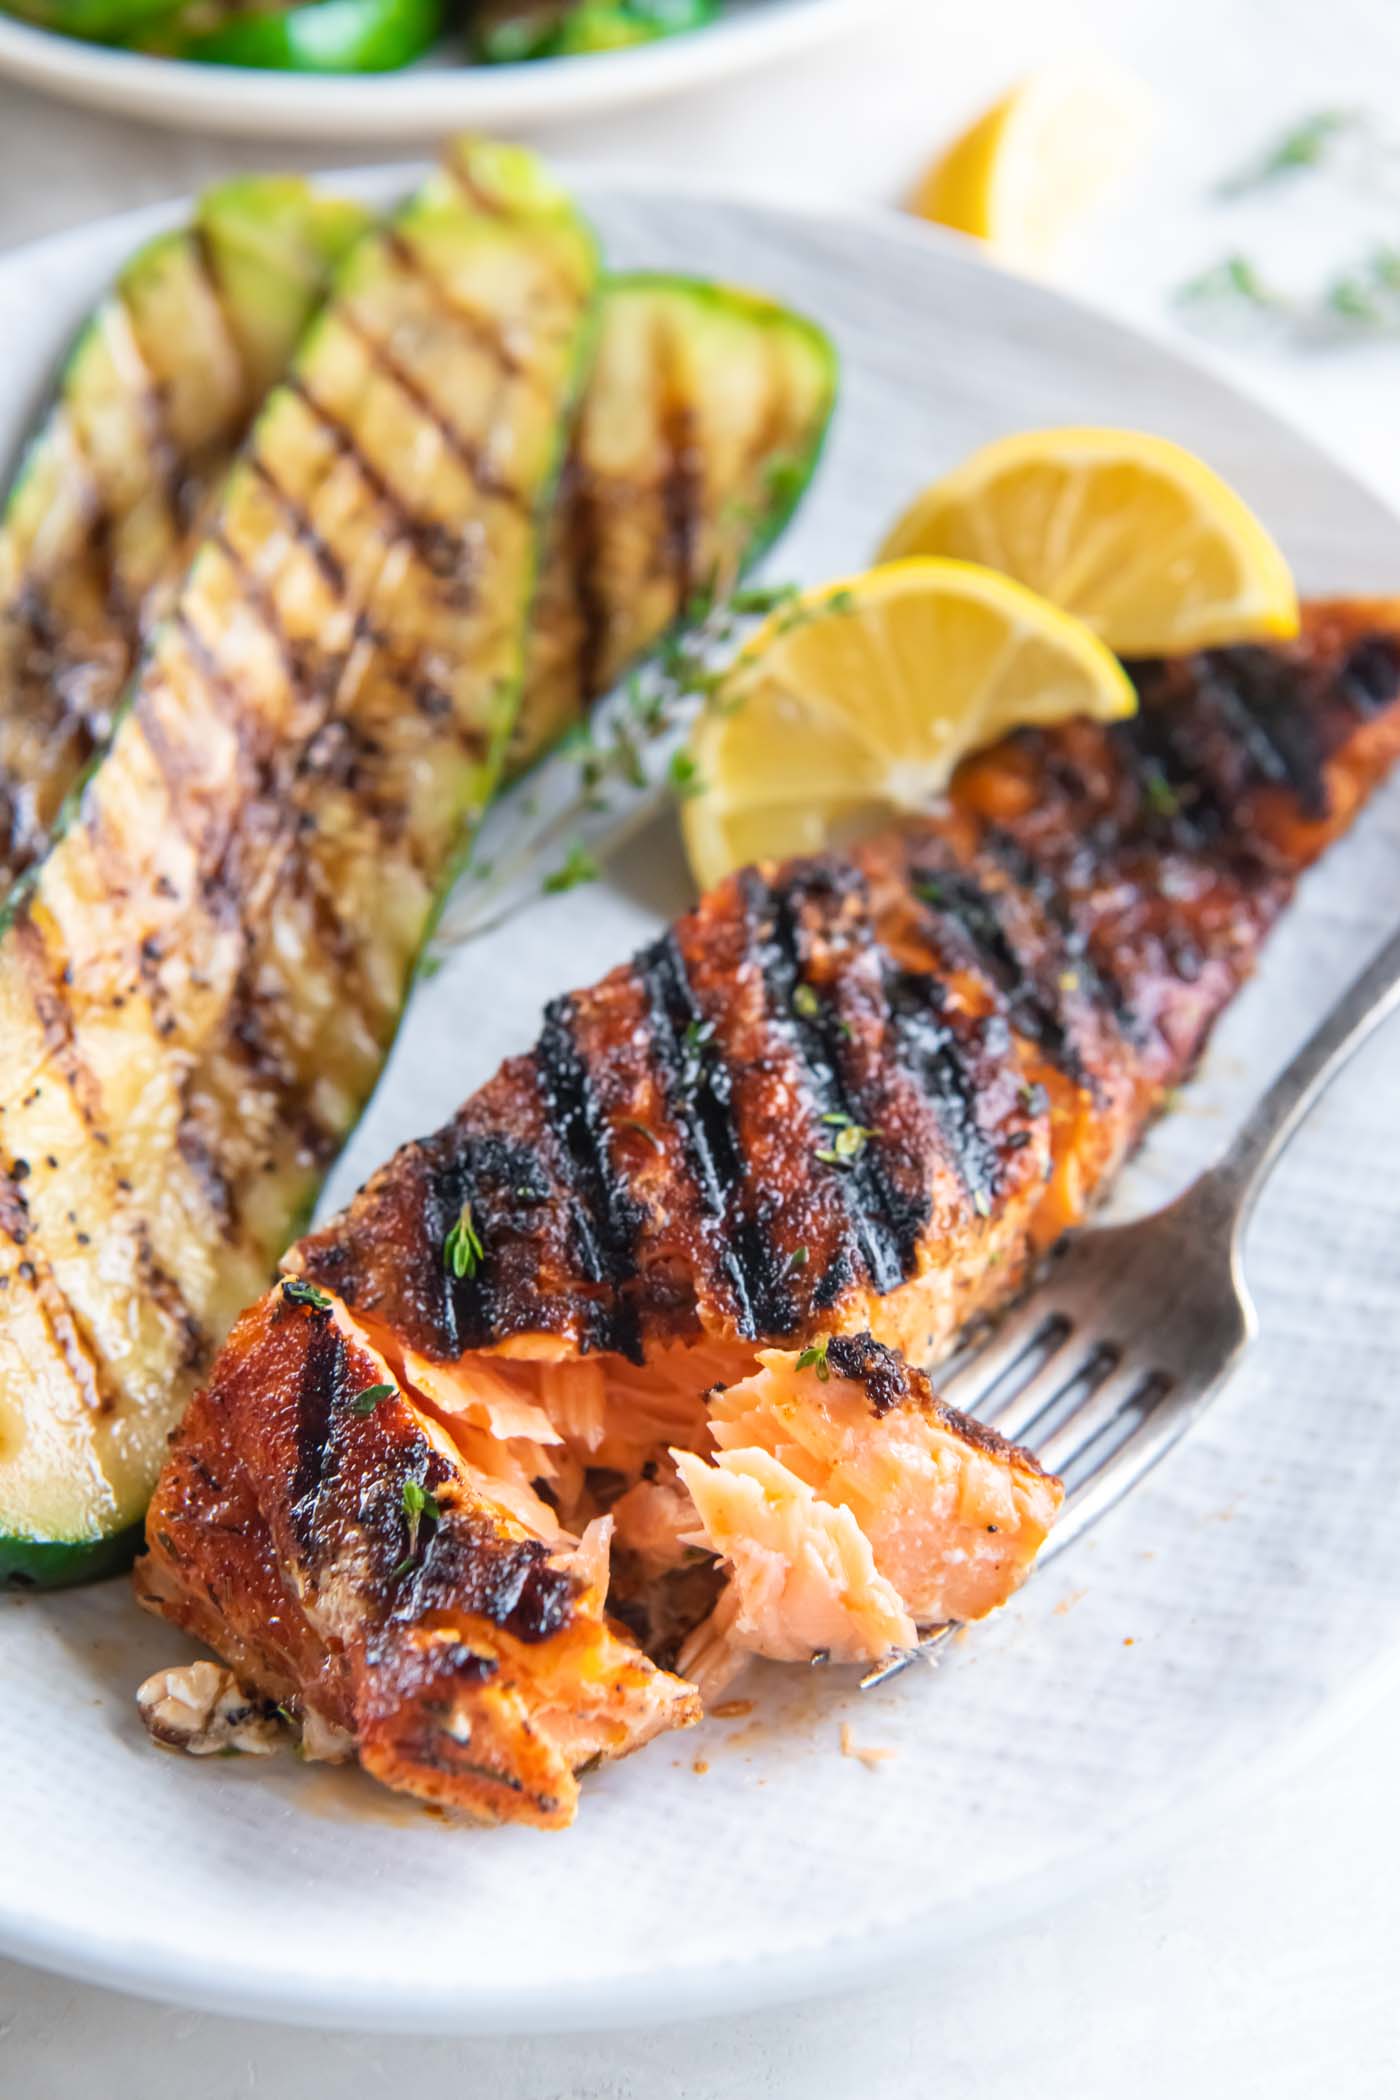 Salmon fillet partially flaked on a fork, served with grilled zucchini.